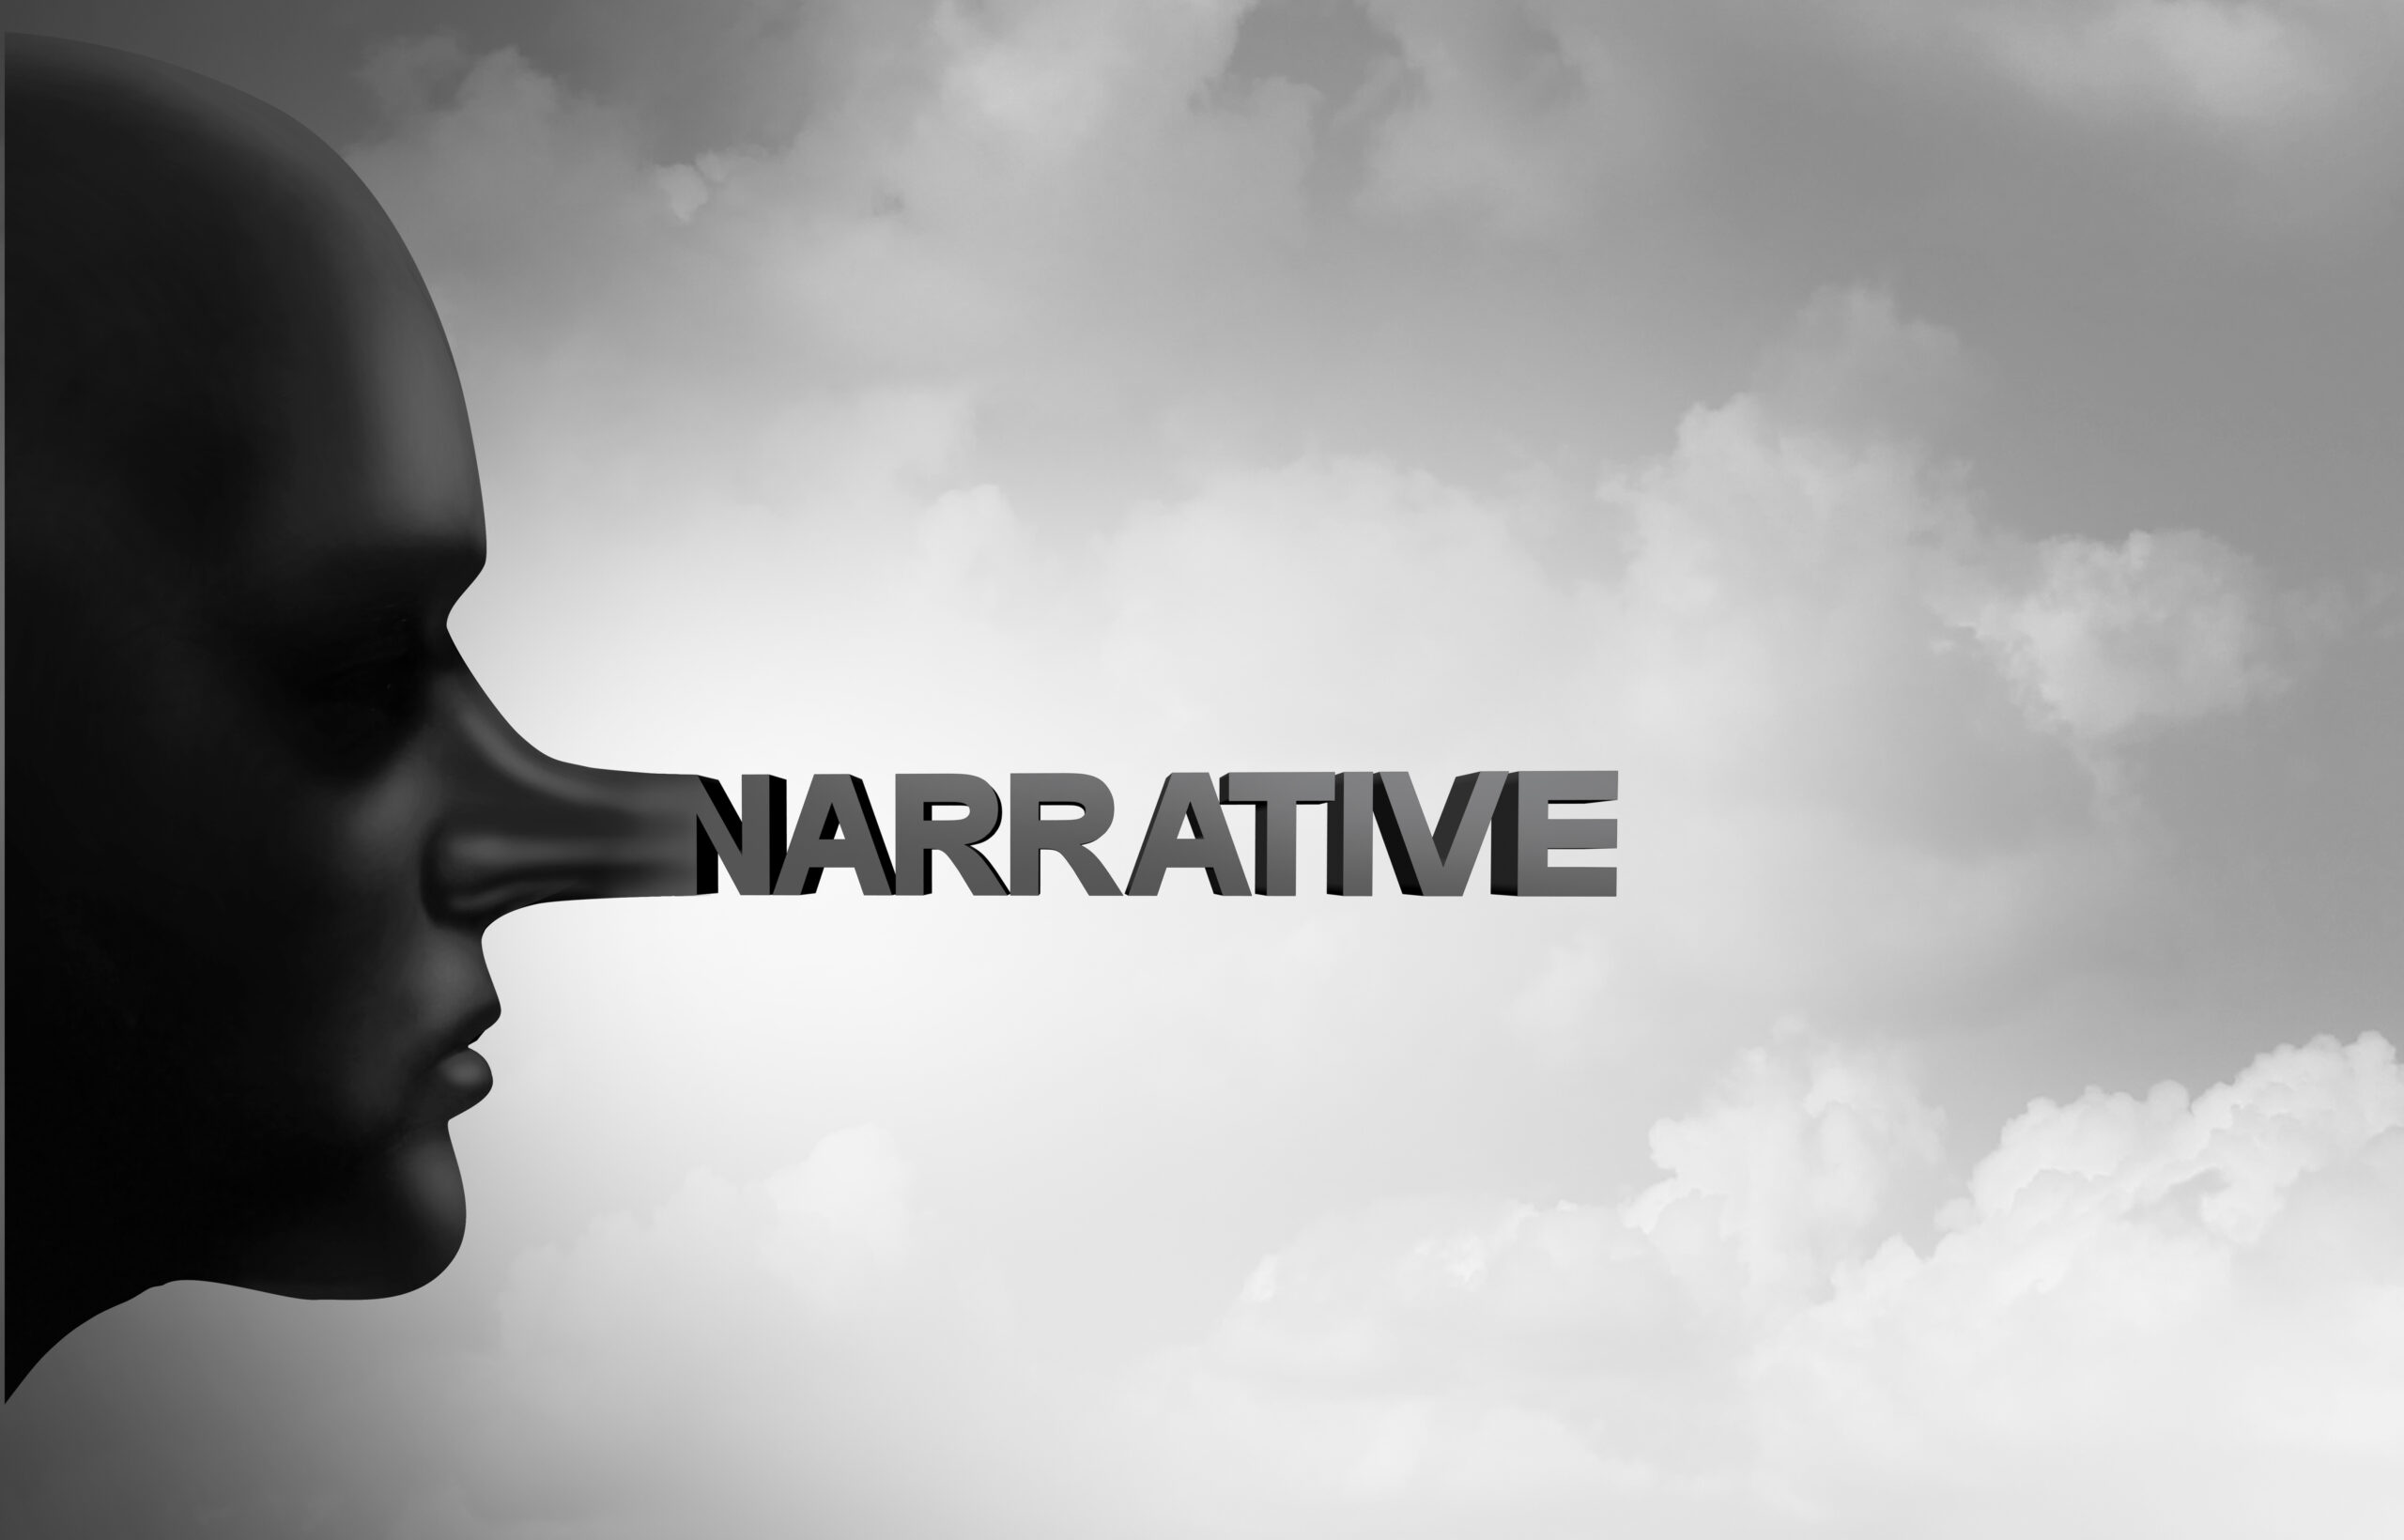 False Narratives: “The Lies We Tell Ourselves”